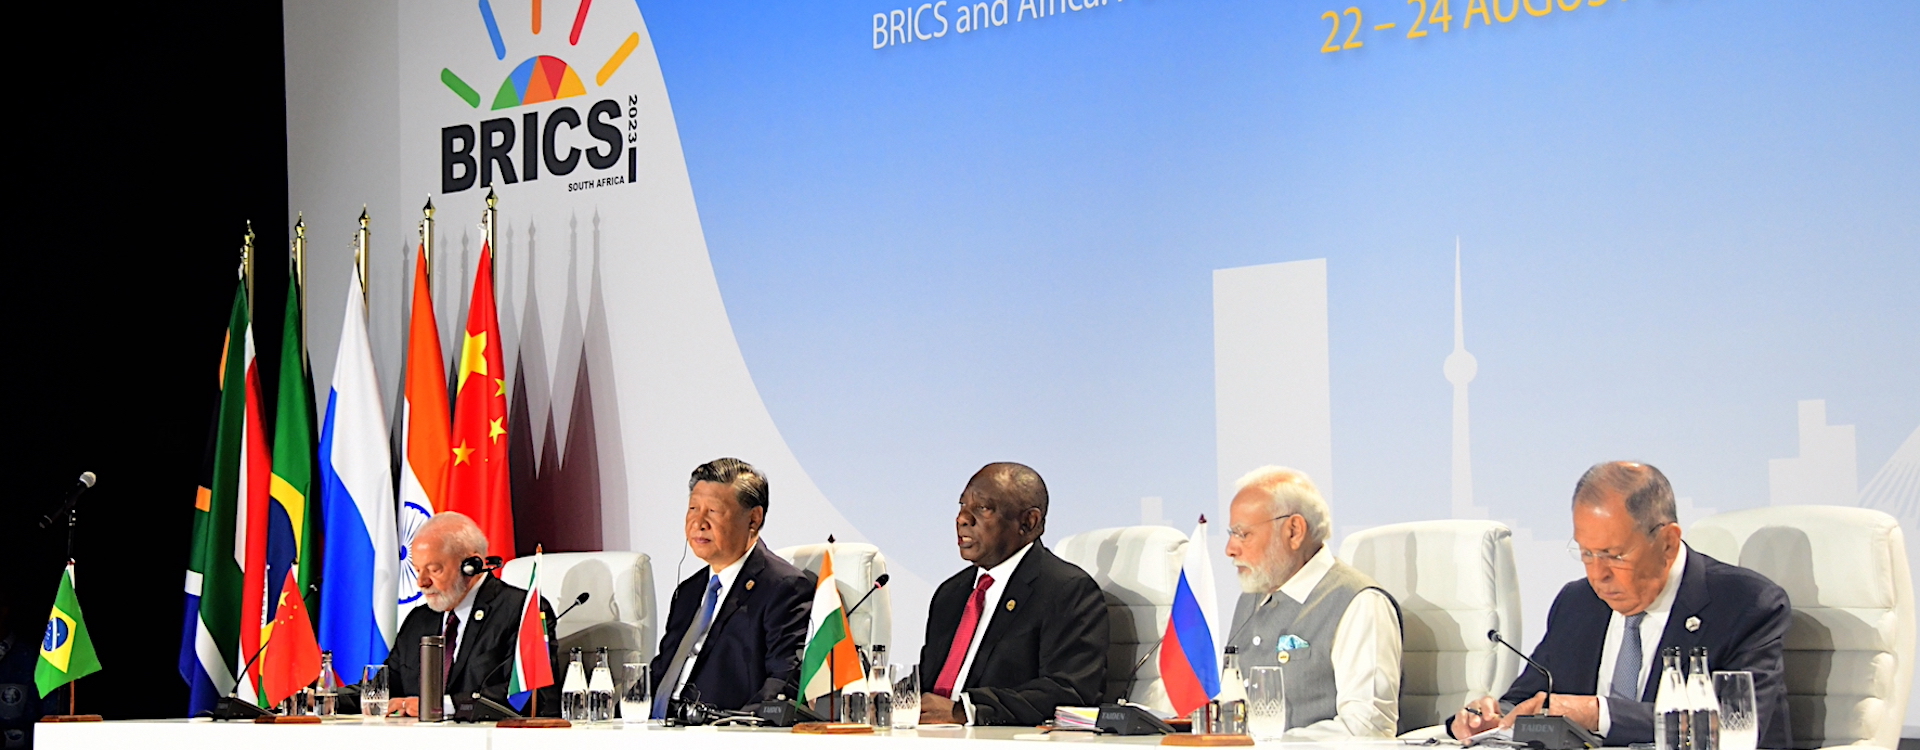 Does BRICS+ signify the inevitability of a more divided world?